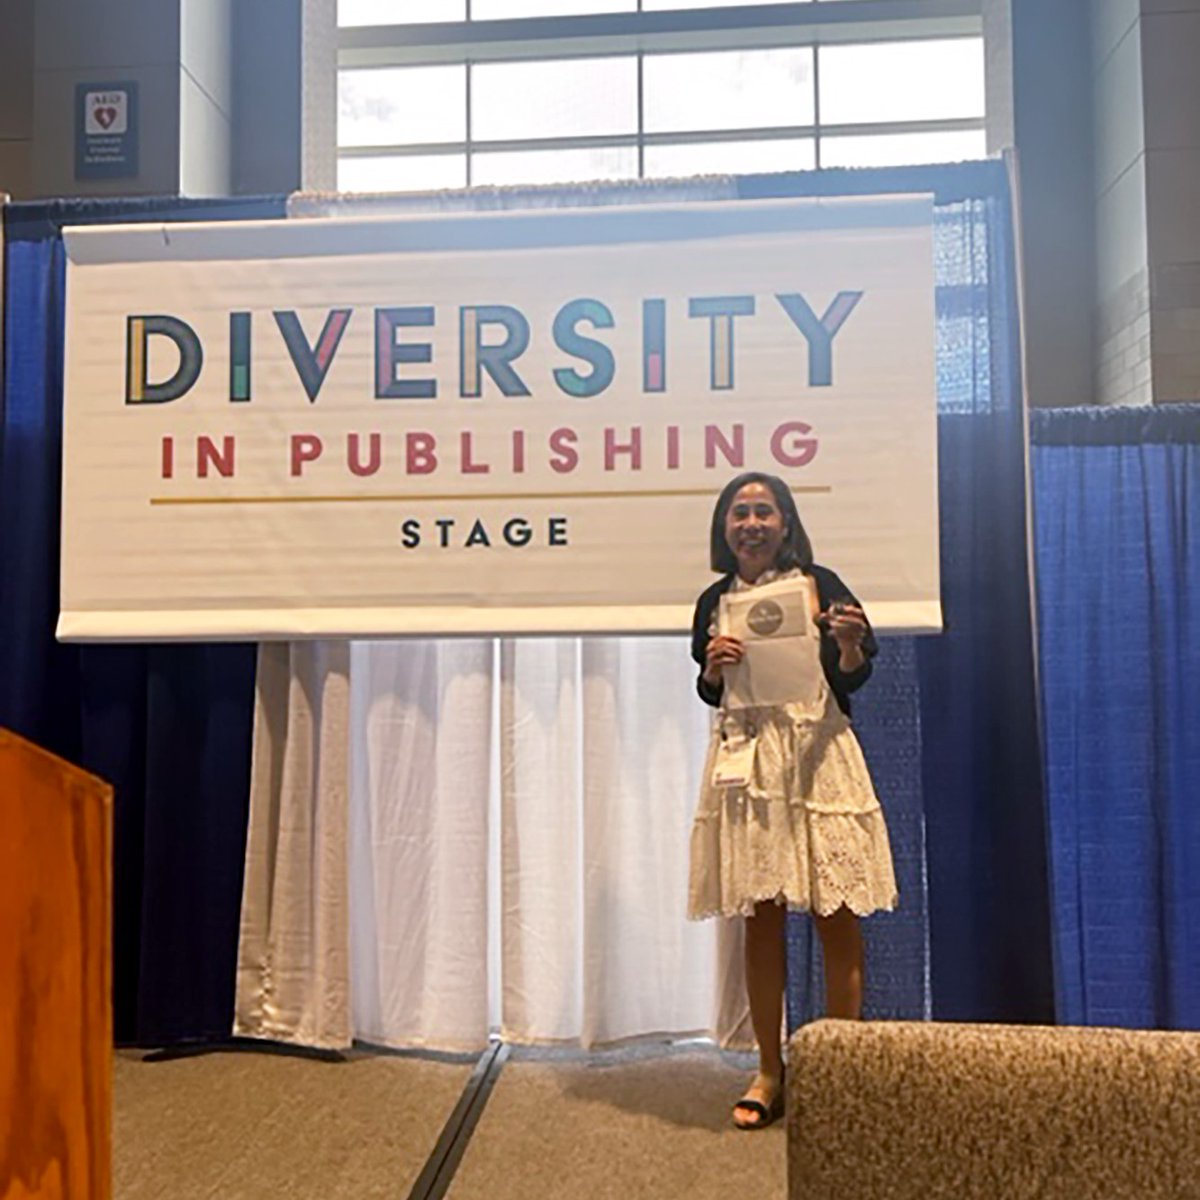 WOW! What an amazing #ALAAC23! Thank you to everyone who stopped by our booth (including authors @pragmaticmom, @shirinsbooks and @baptistepaul). It’s always a wonderful time connecting with #librarians and seeing their outpouring of love for our books #ALA #ALAAnnualConference